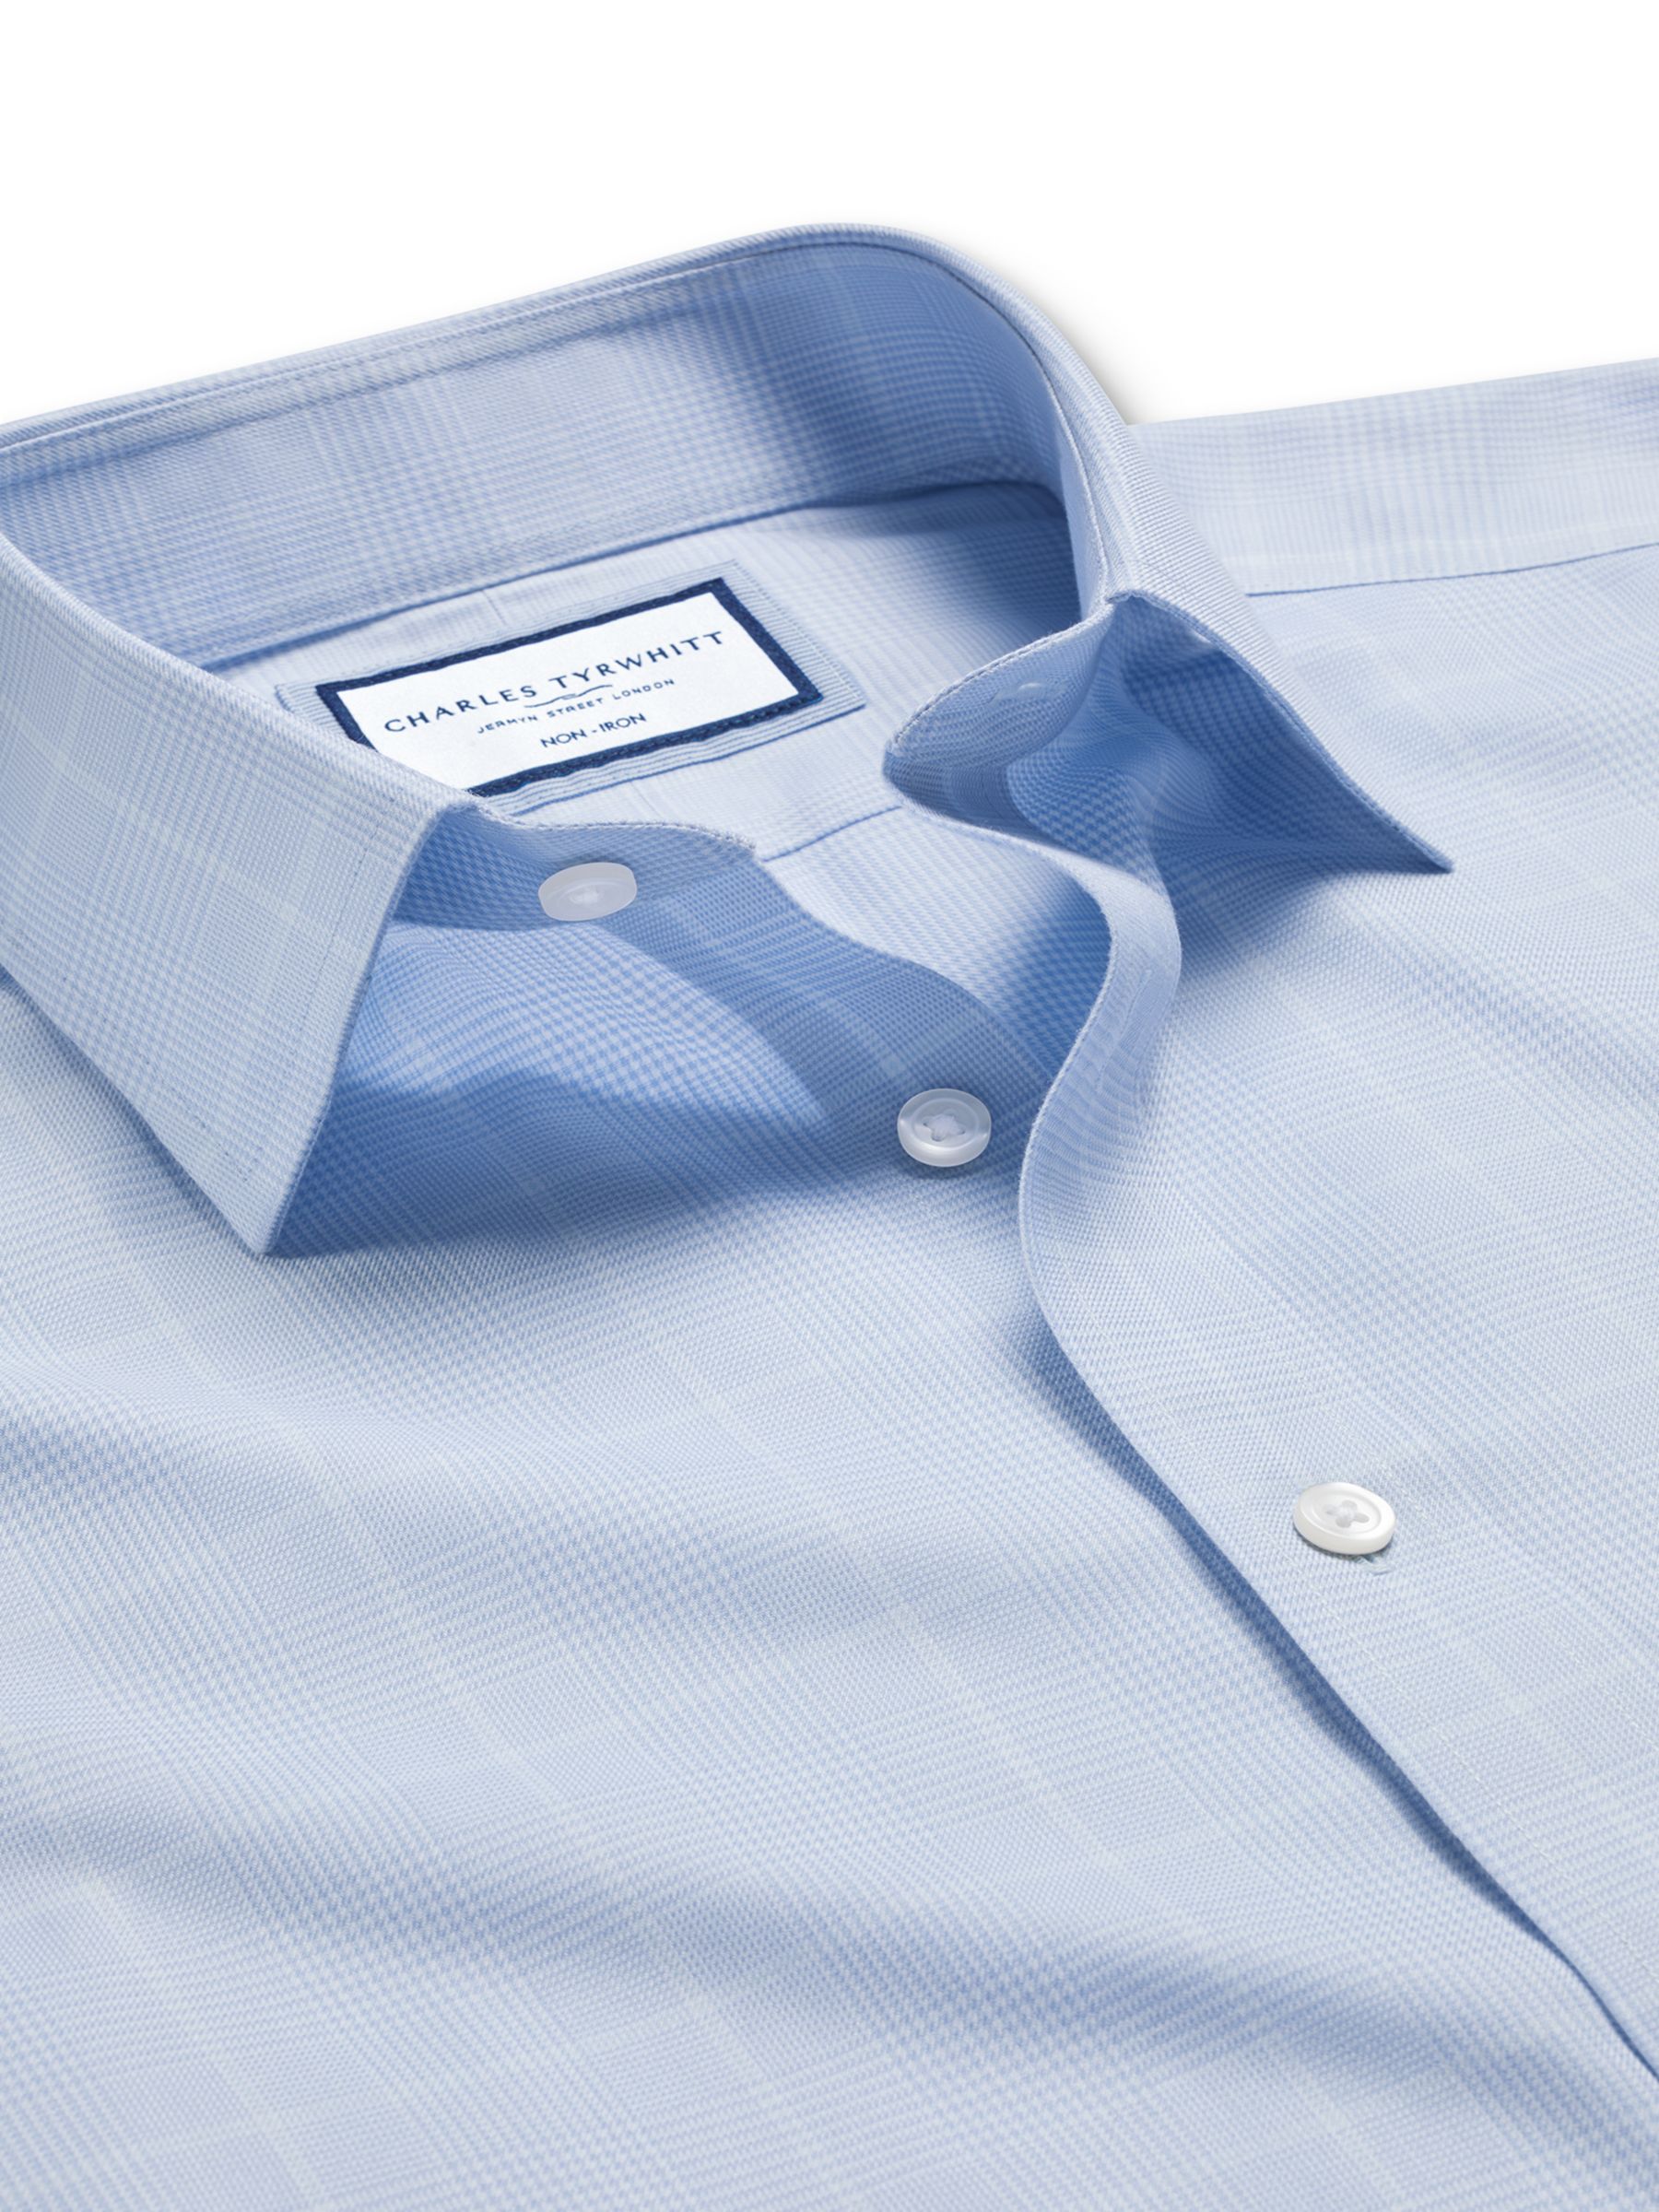 Buy Charles Tyrwhitt Non-Iron Prince Of Wales Check Shirt, Blue Online at johnlewis.com